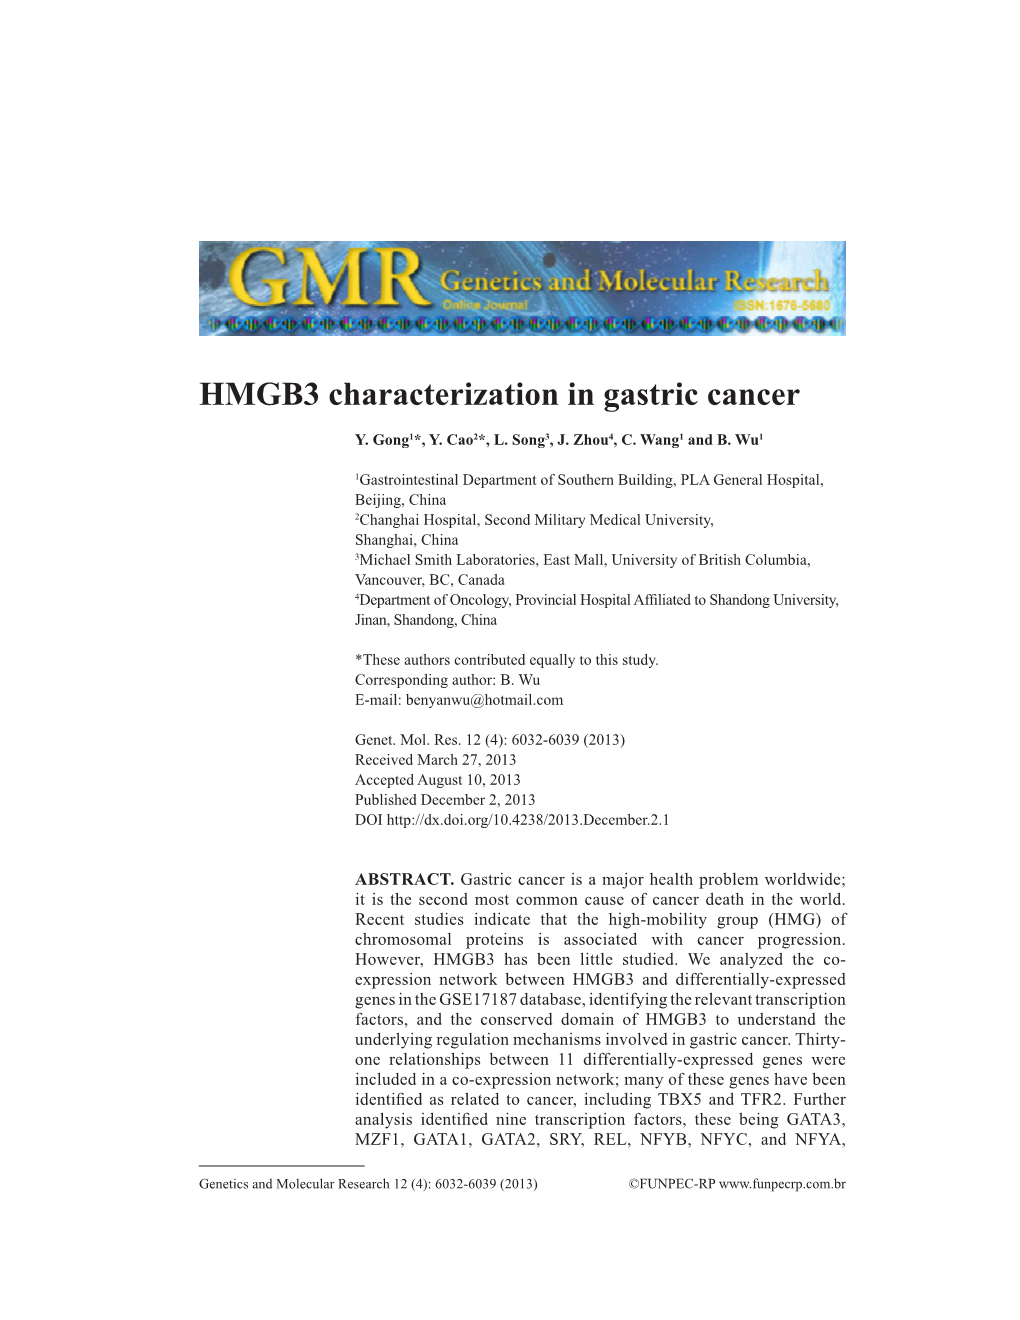 HMGB3 Characterization in Gastric Cancer